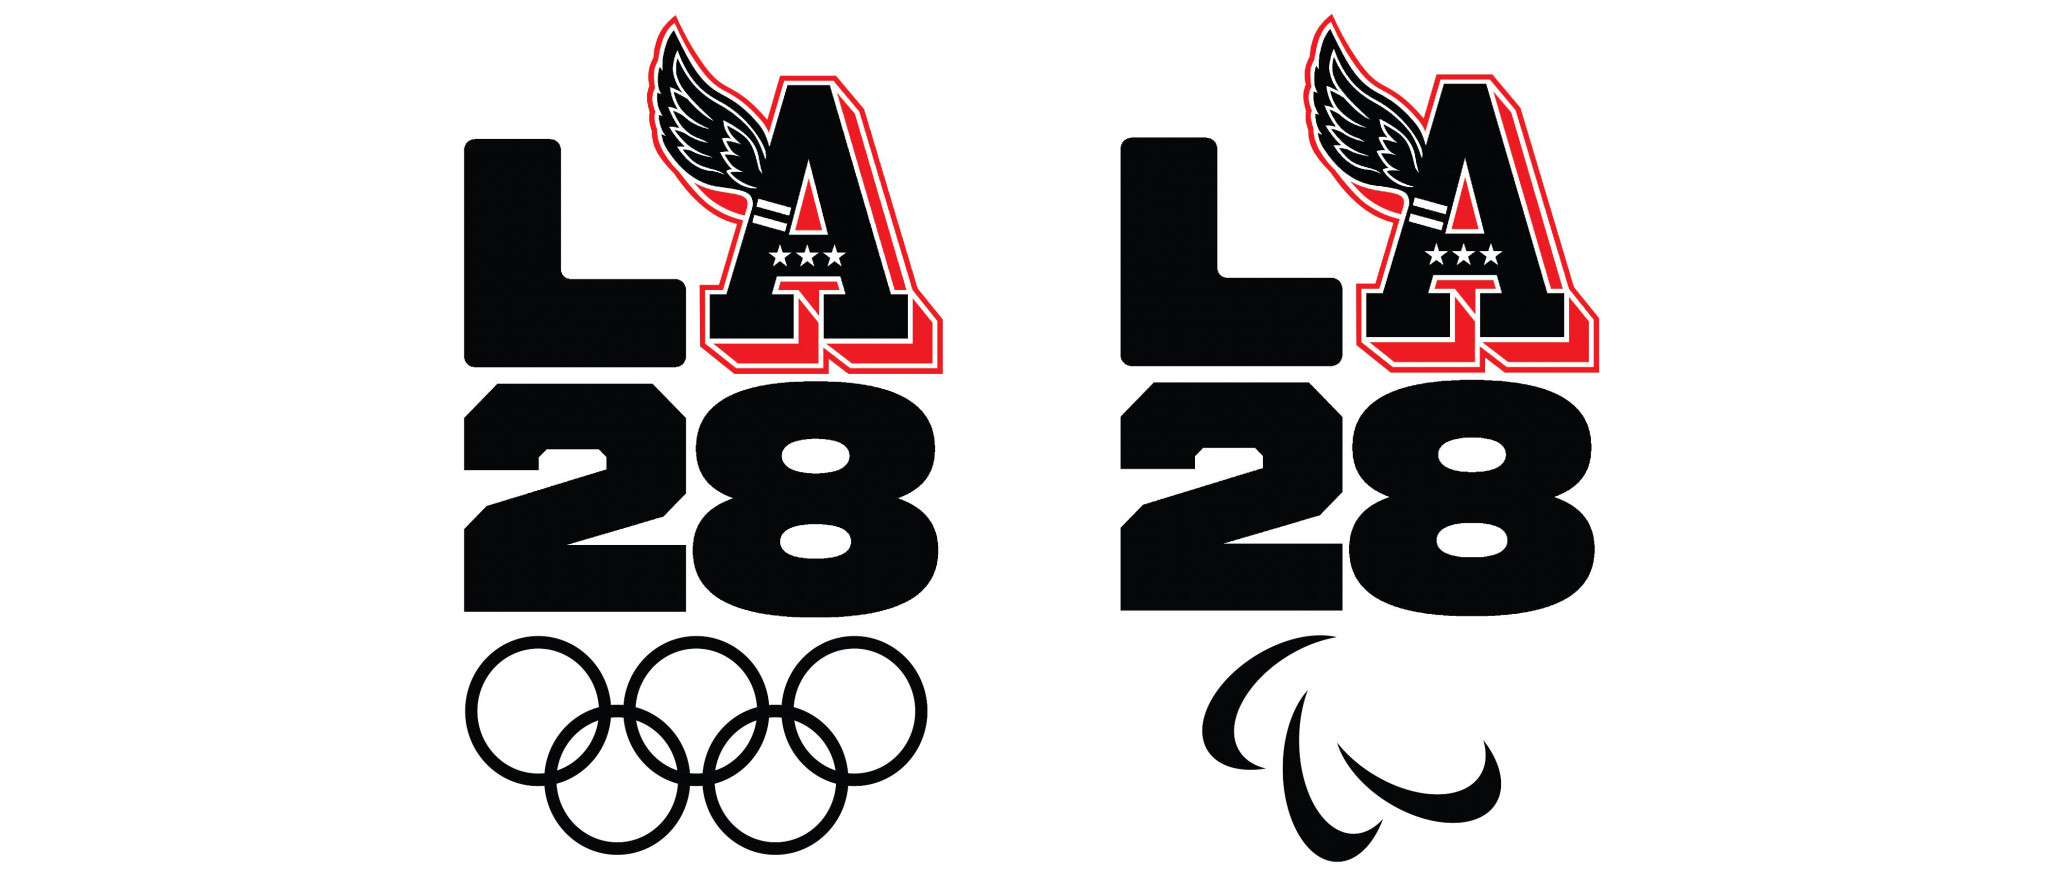 Ralph Lauren becomes second sponsor to release customised Los Angeles 2028 logo